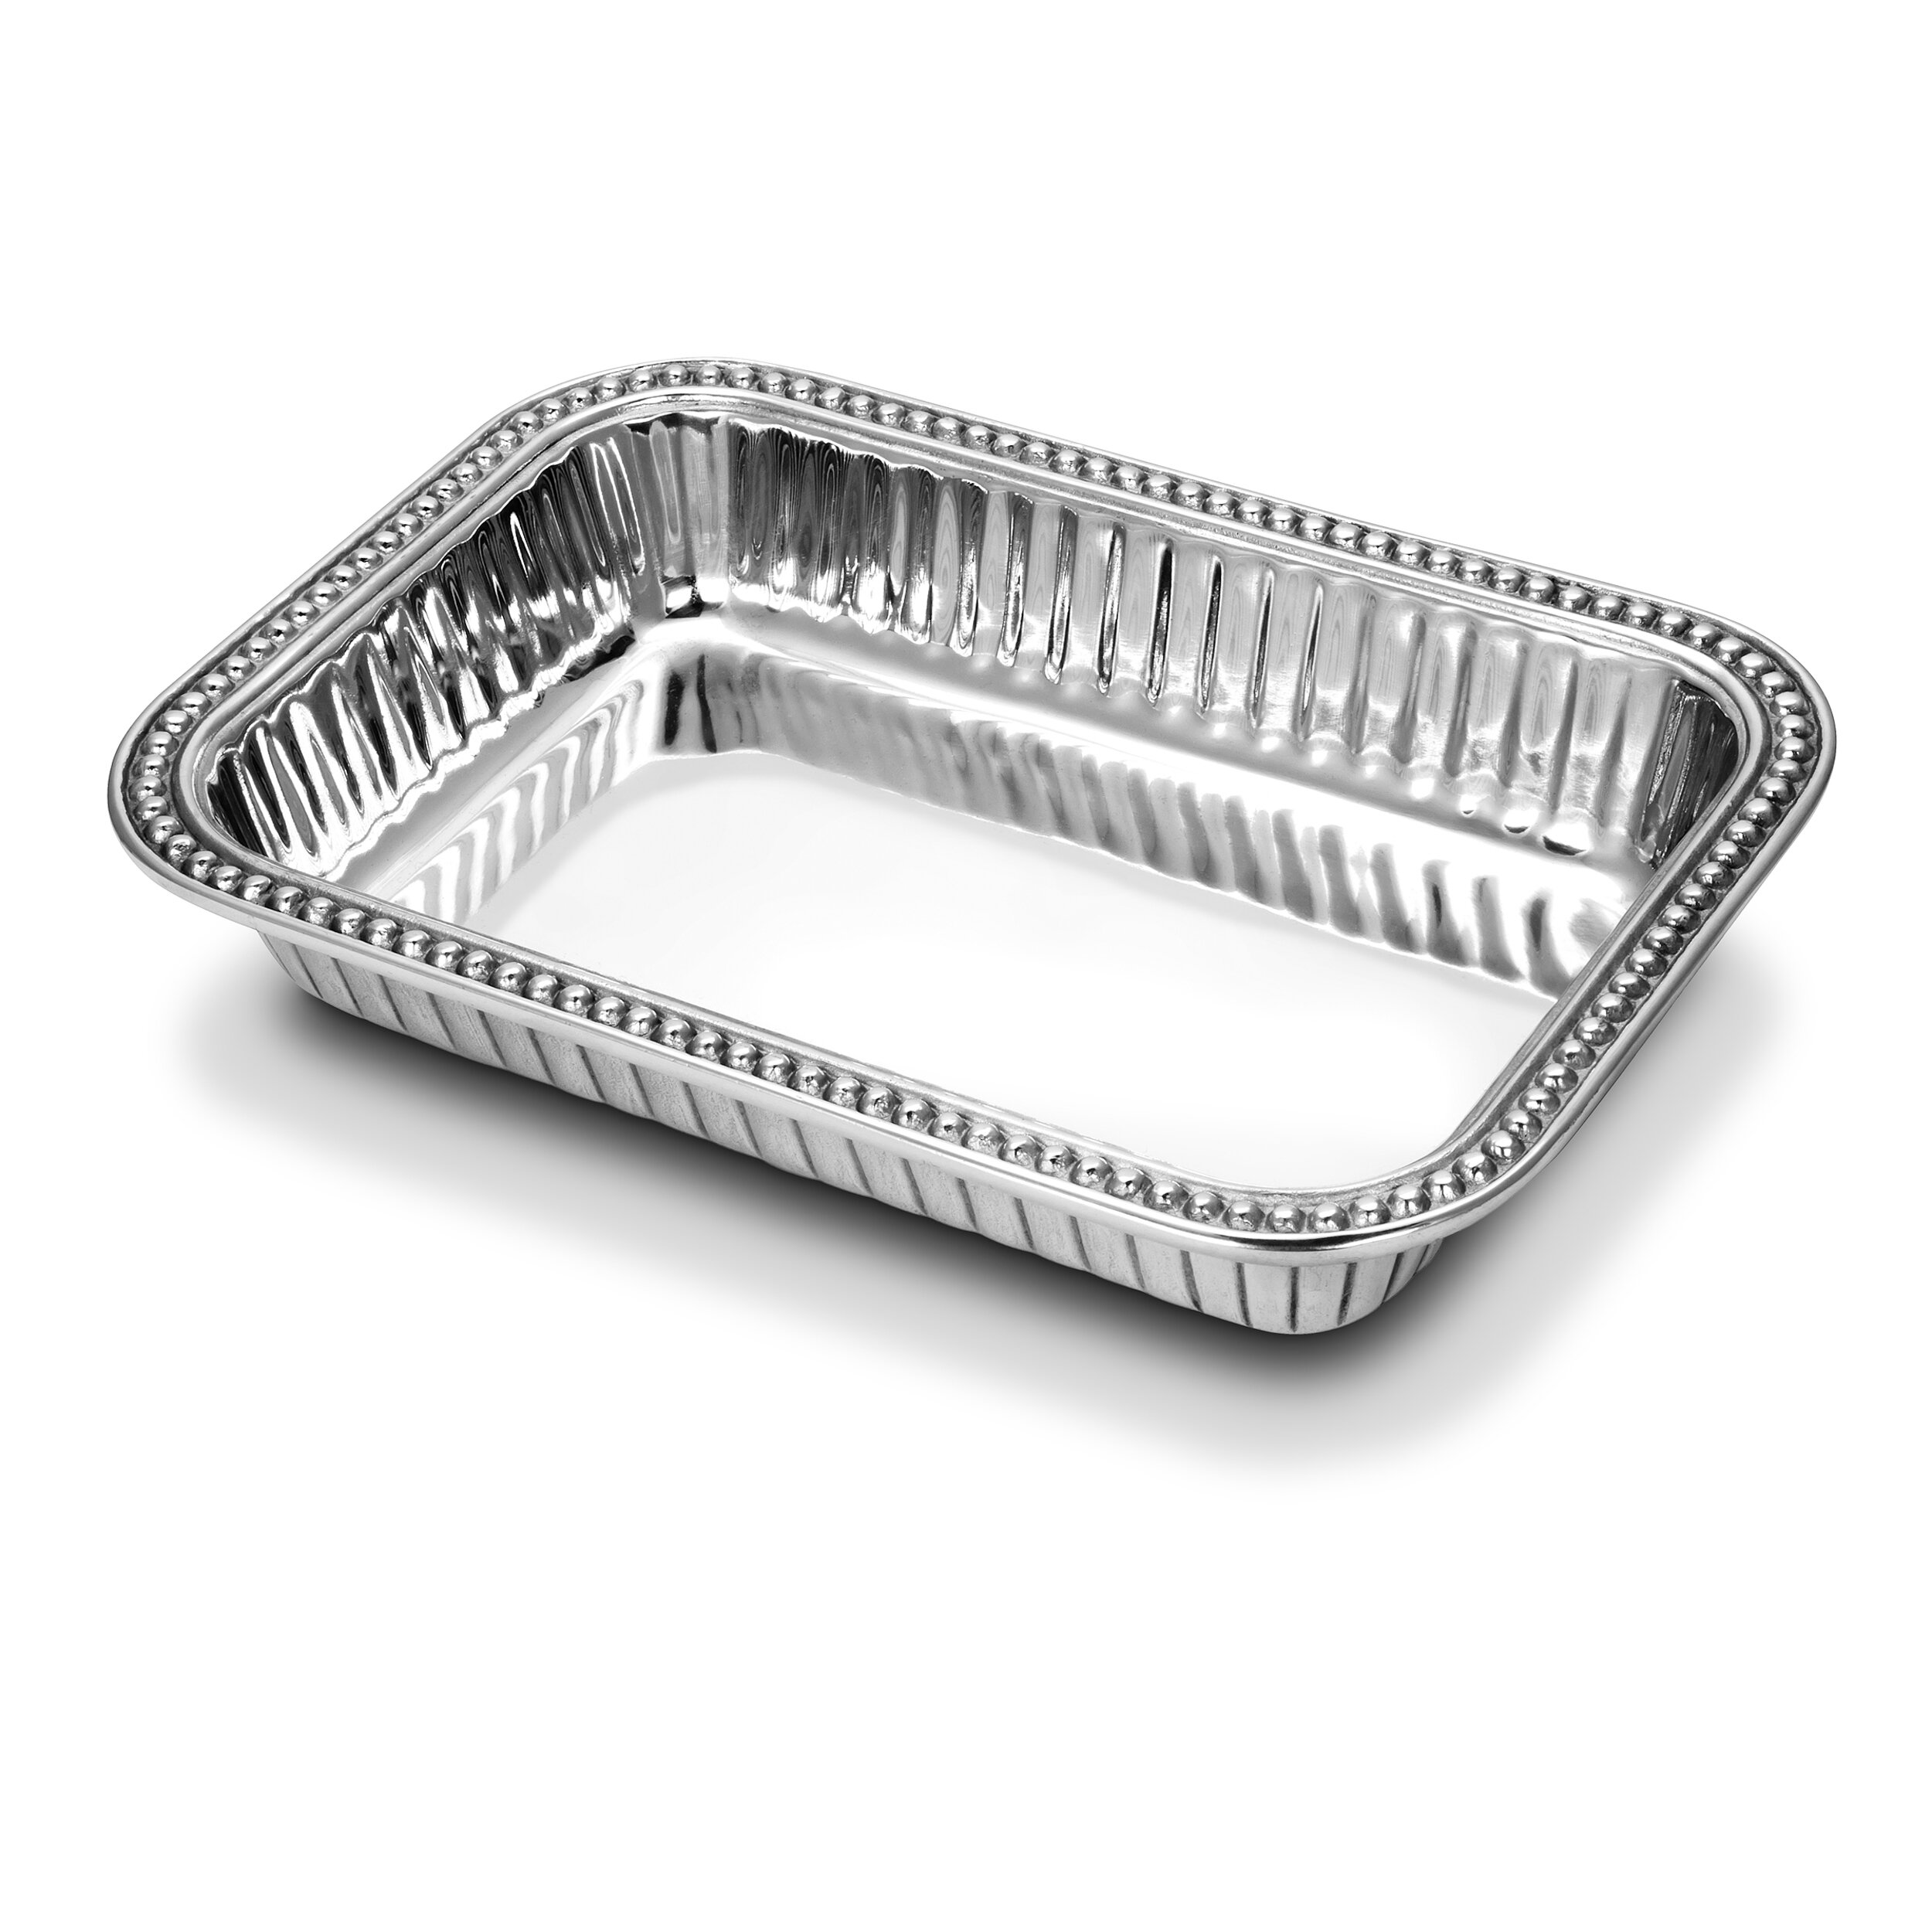 Wilton Cake Pan With Cover, 13 x 9, Silver